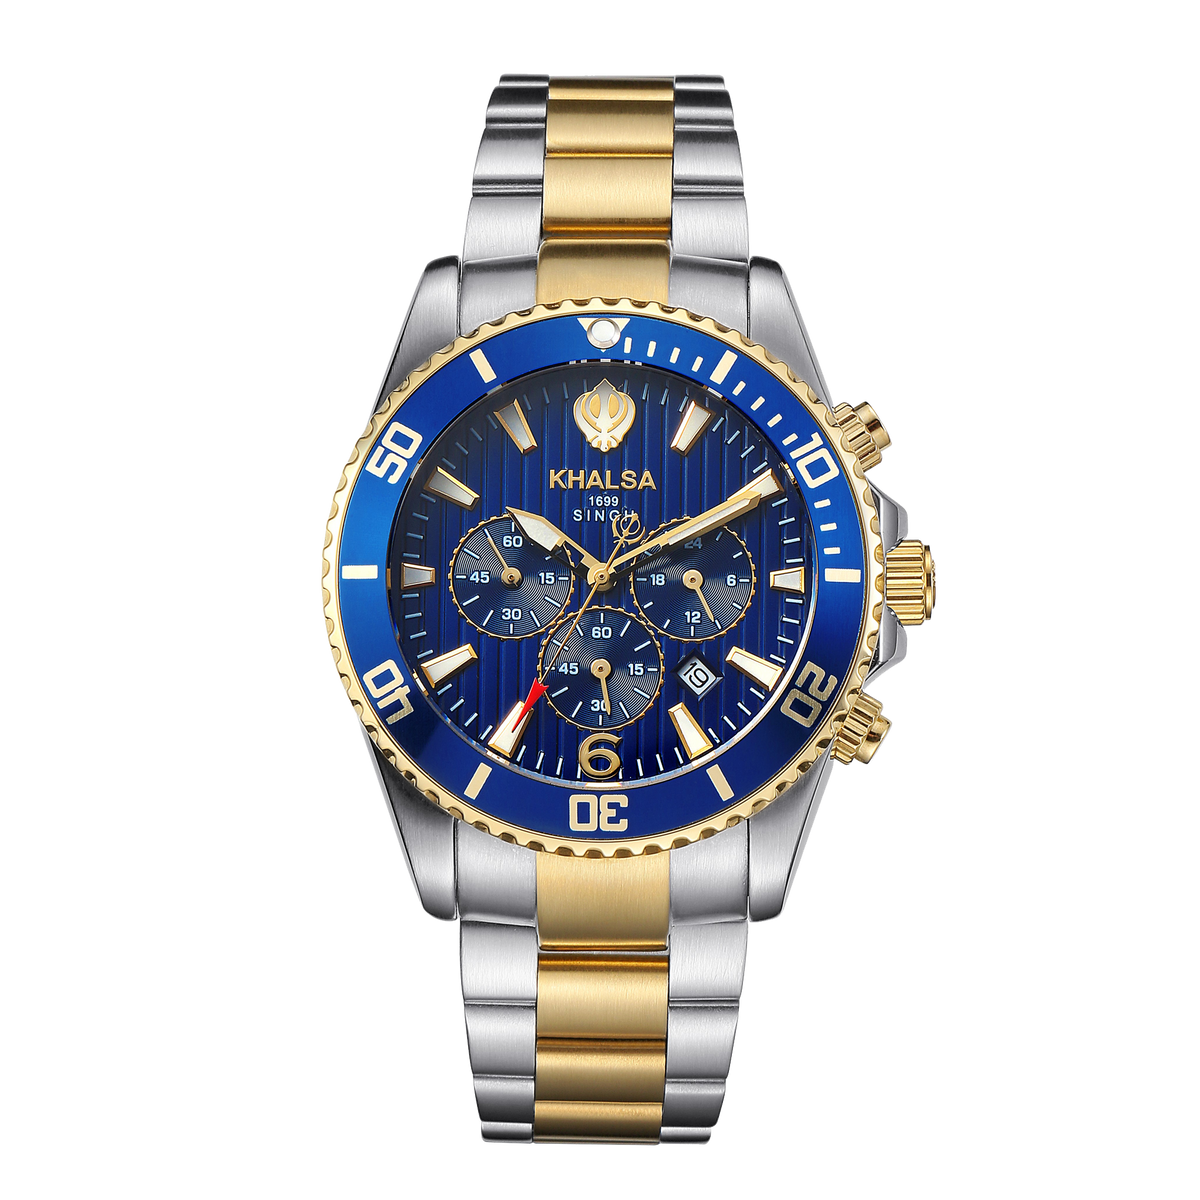 Singh Blue Luxury Swiss Sikh Watch with Khanda Symbol, Lion&#39;s Head, and Gold Plated Case - Super Luminous